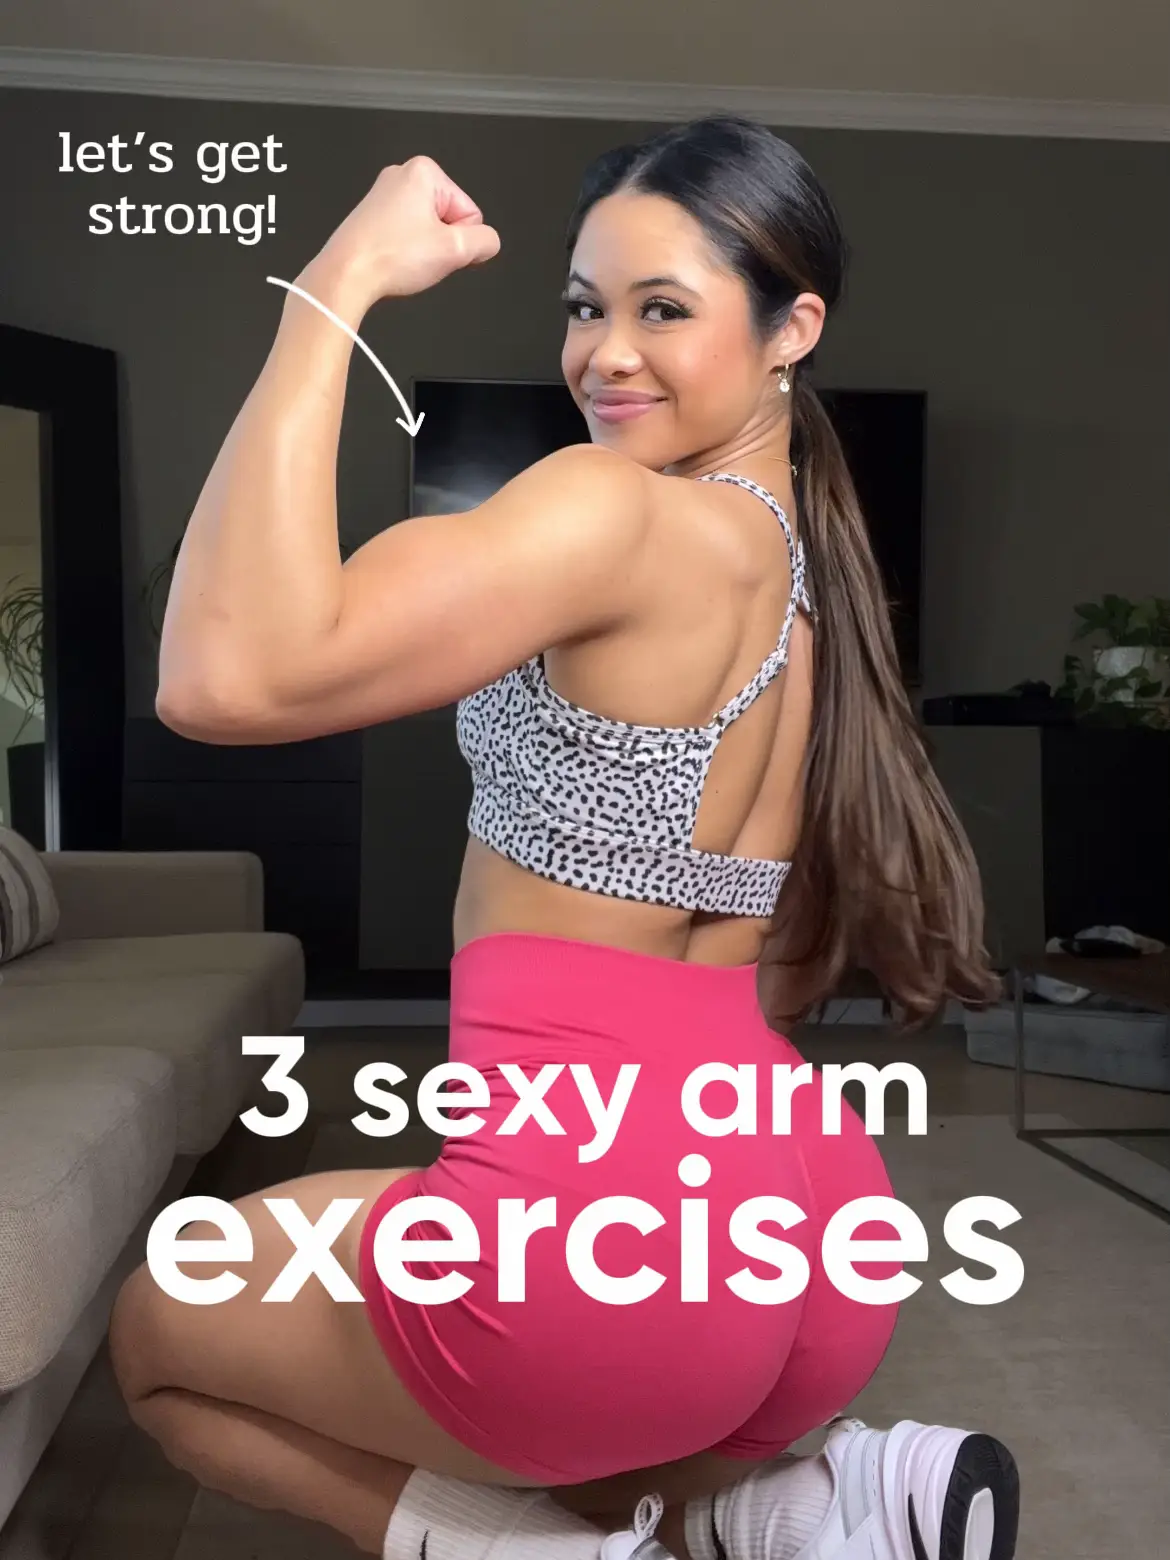 Tone Up Your Arms